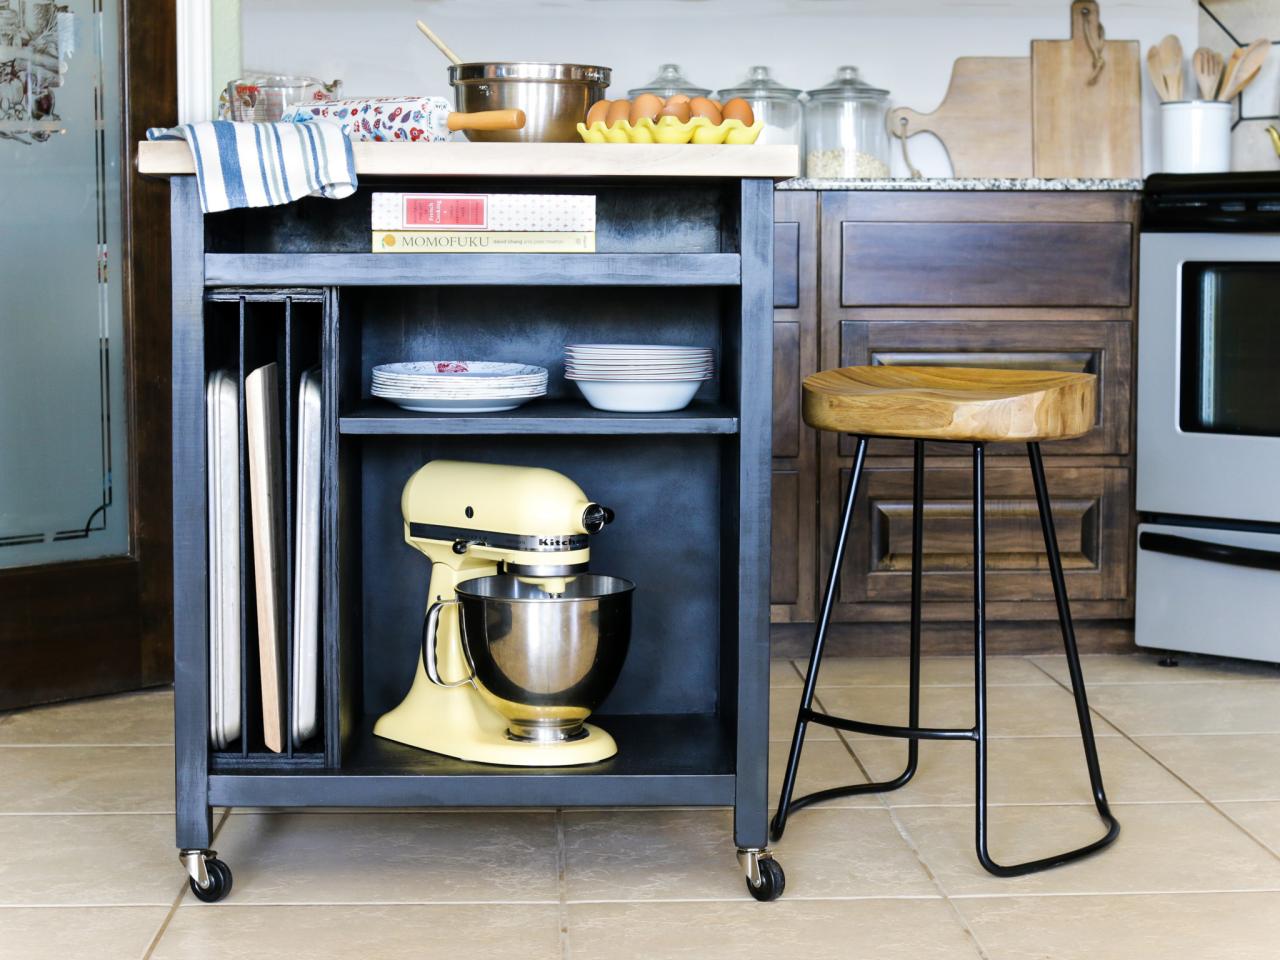 Build A Diy Kitchen Island On Wheels, How To Build A Kitchen Island On Wheels